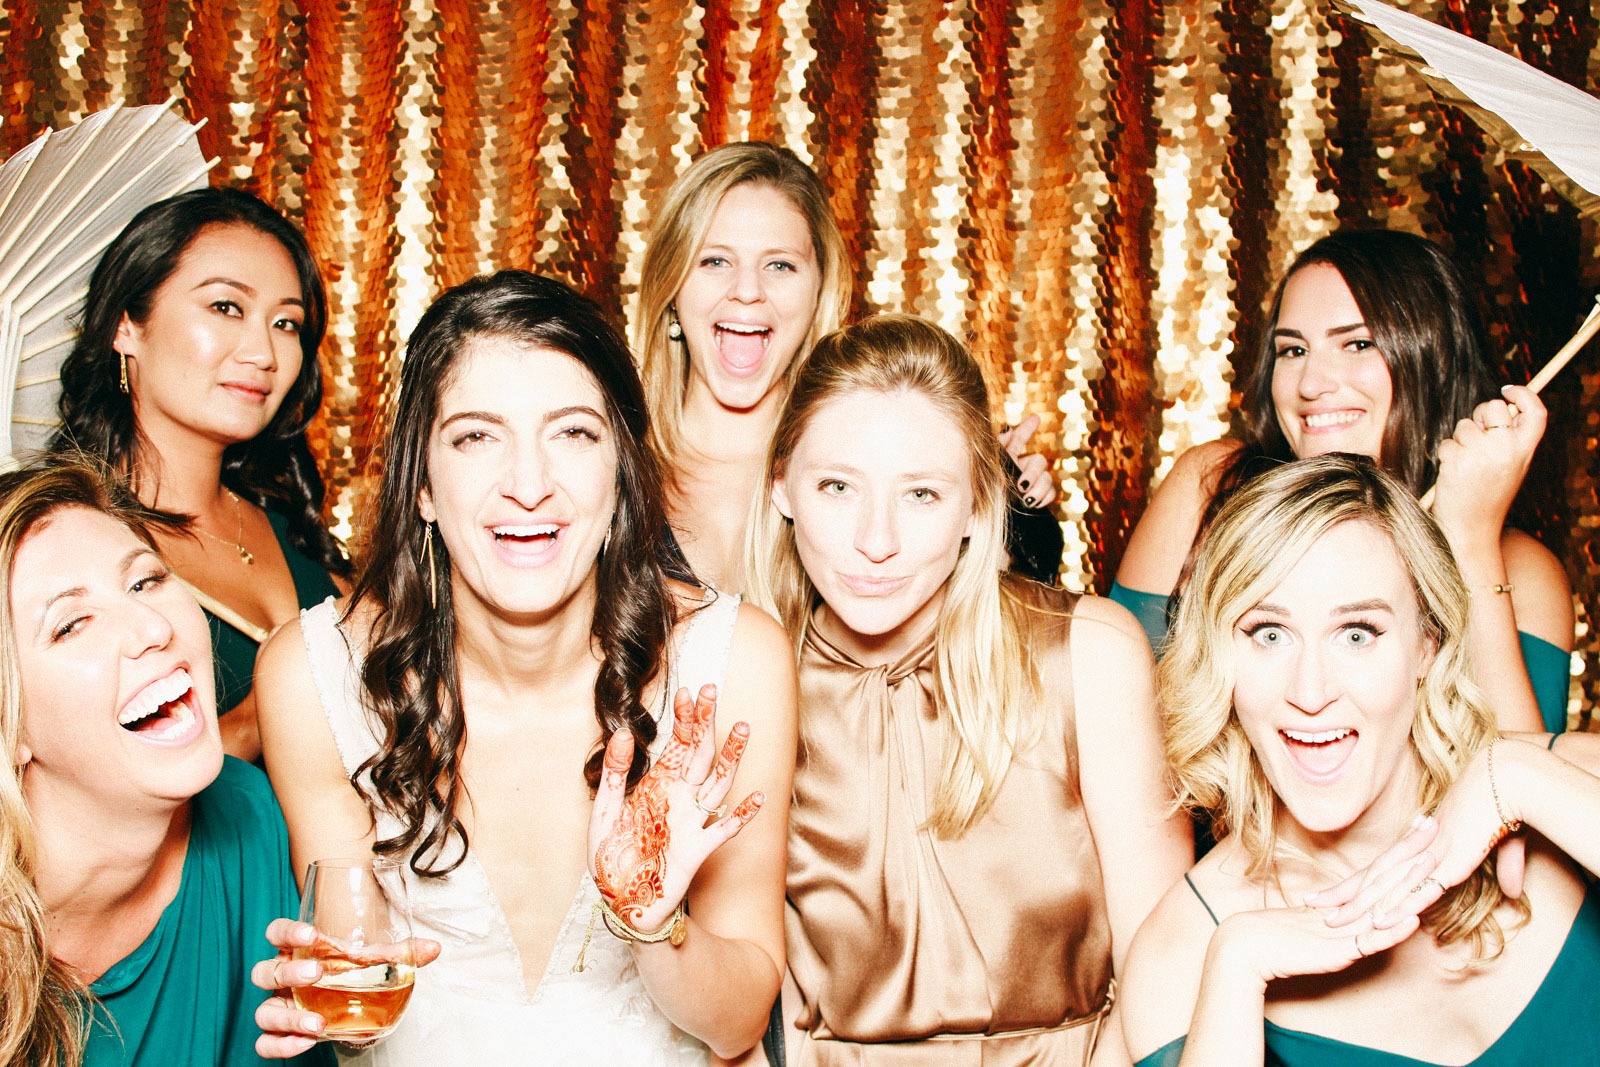 A group photo of a bride and her bridesmaids against a gold sequin backdrop from Hive Photo Booth rentals.